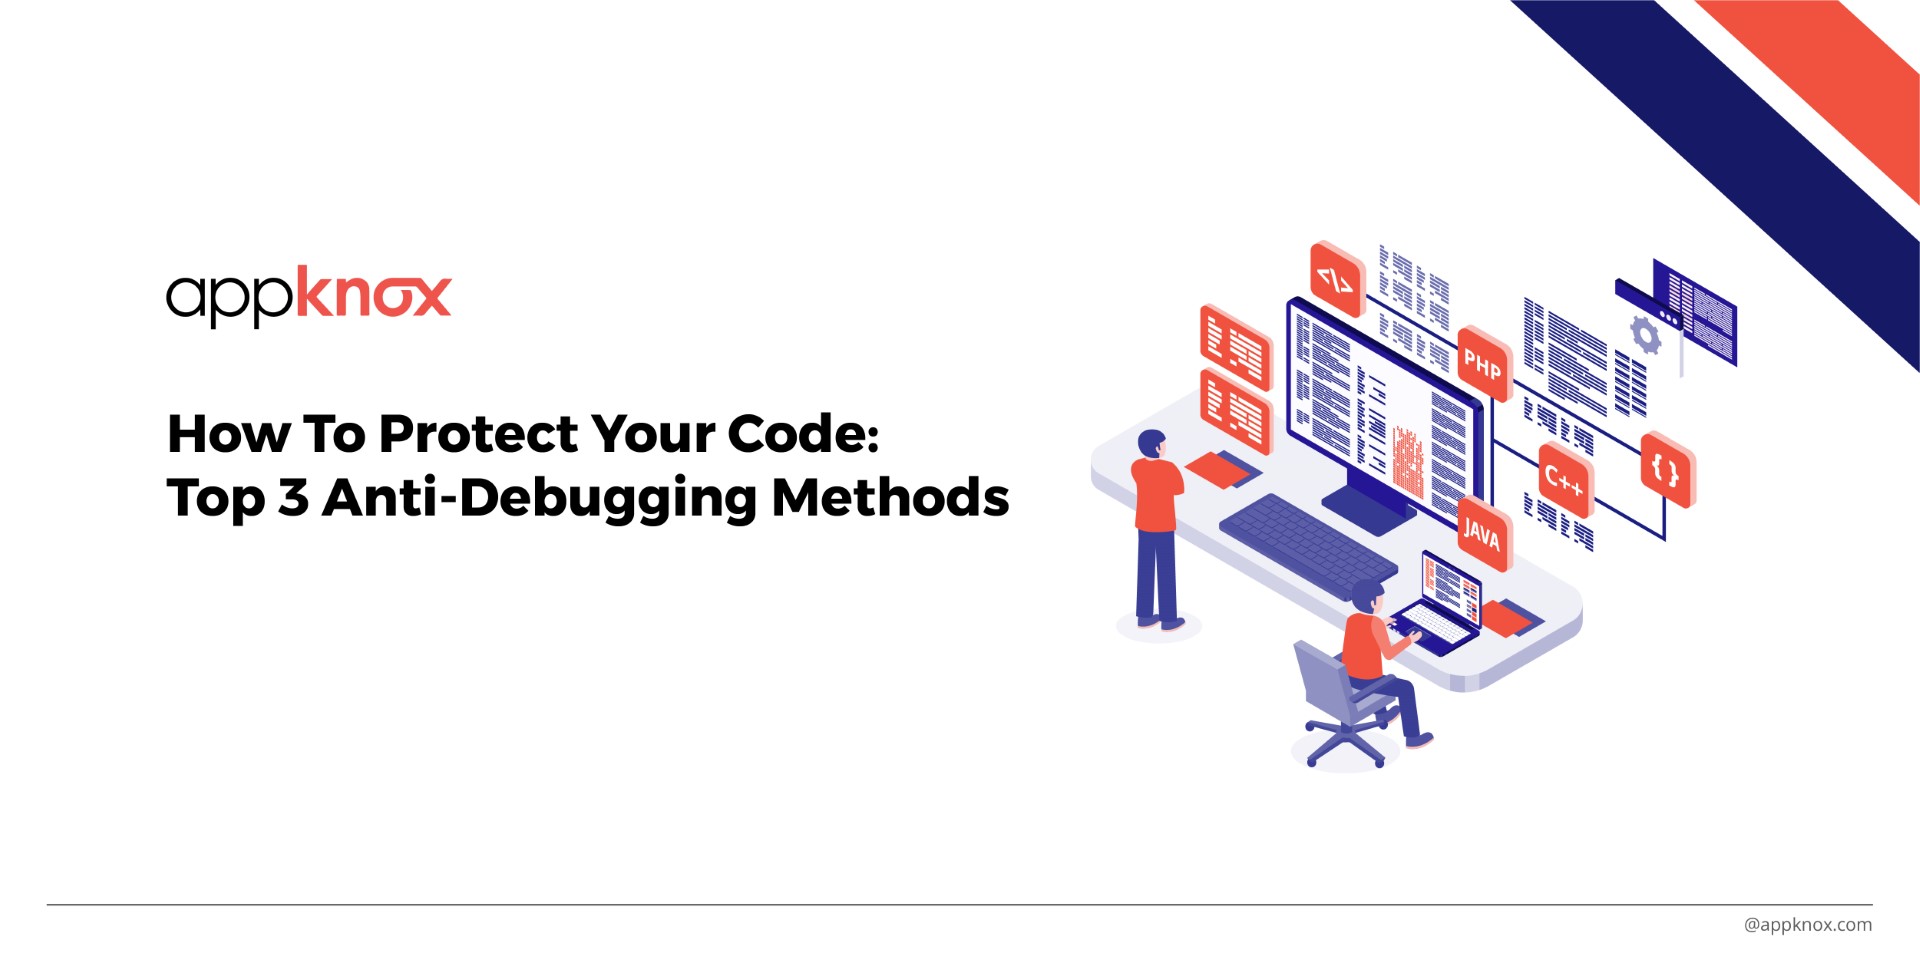 How To Protect Your Code Top 3 Anti-Debugging Methods